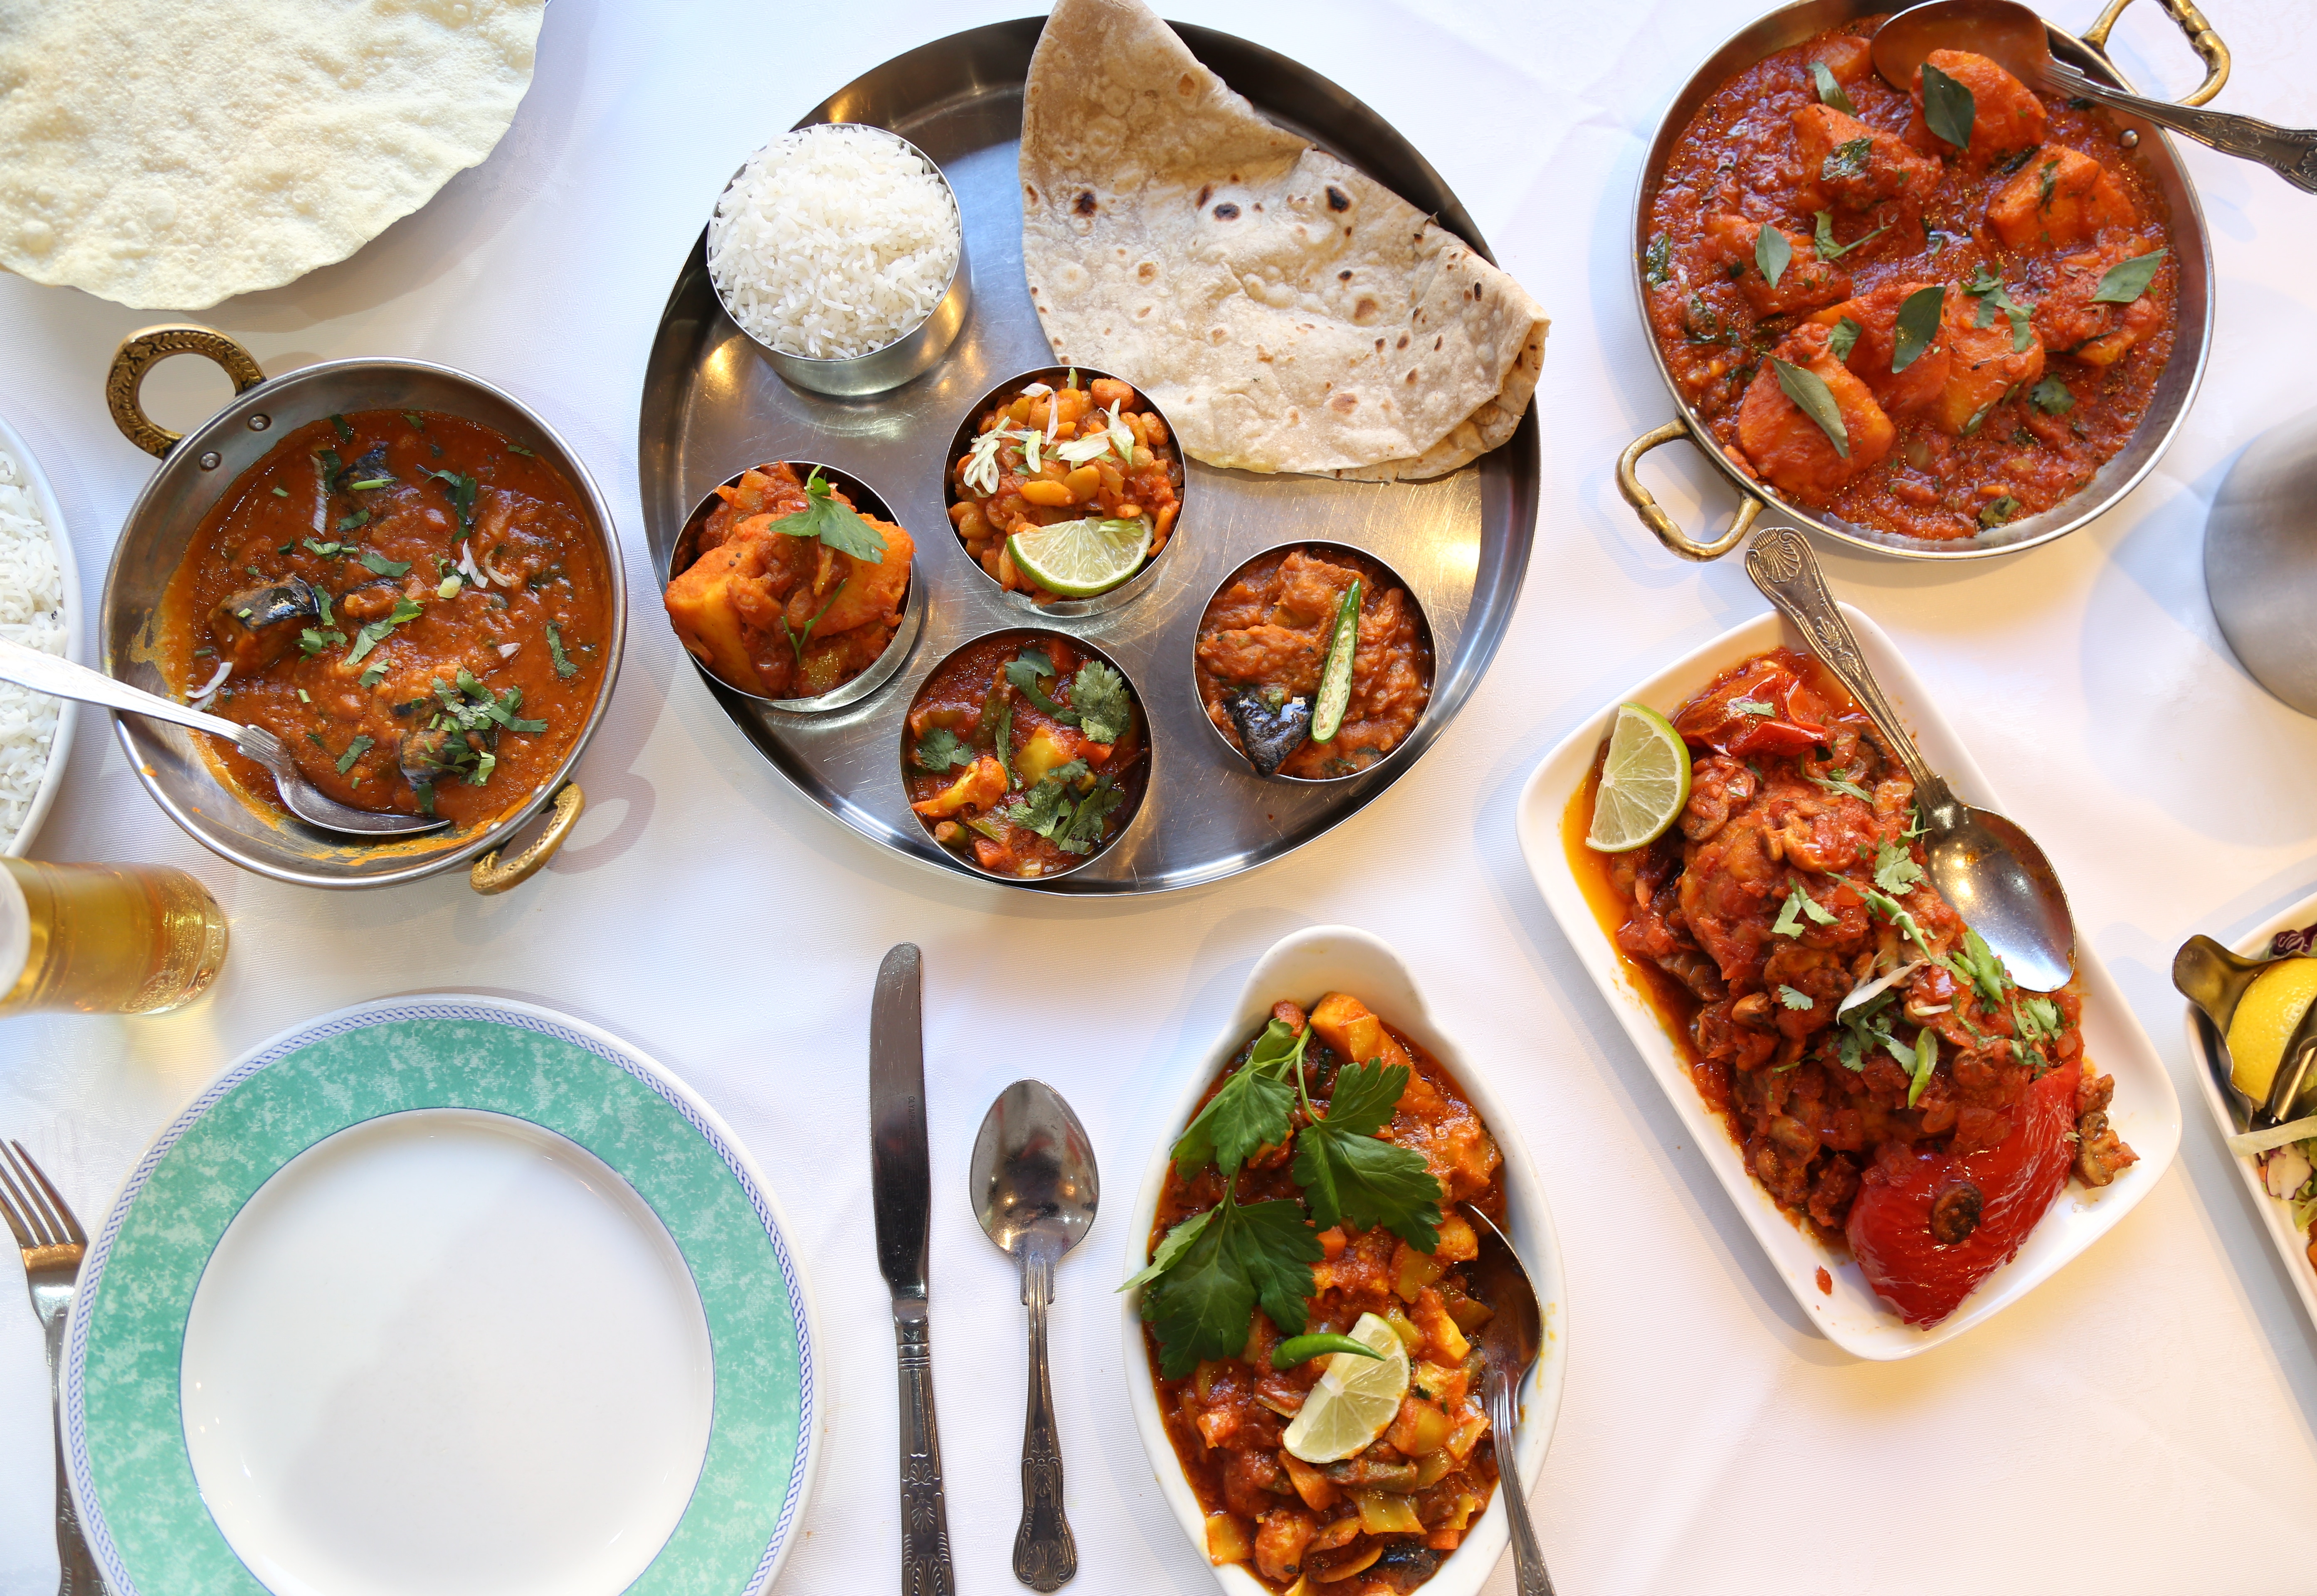 A selection of food from the vegan menu at City Spice, Brick Lane, London